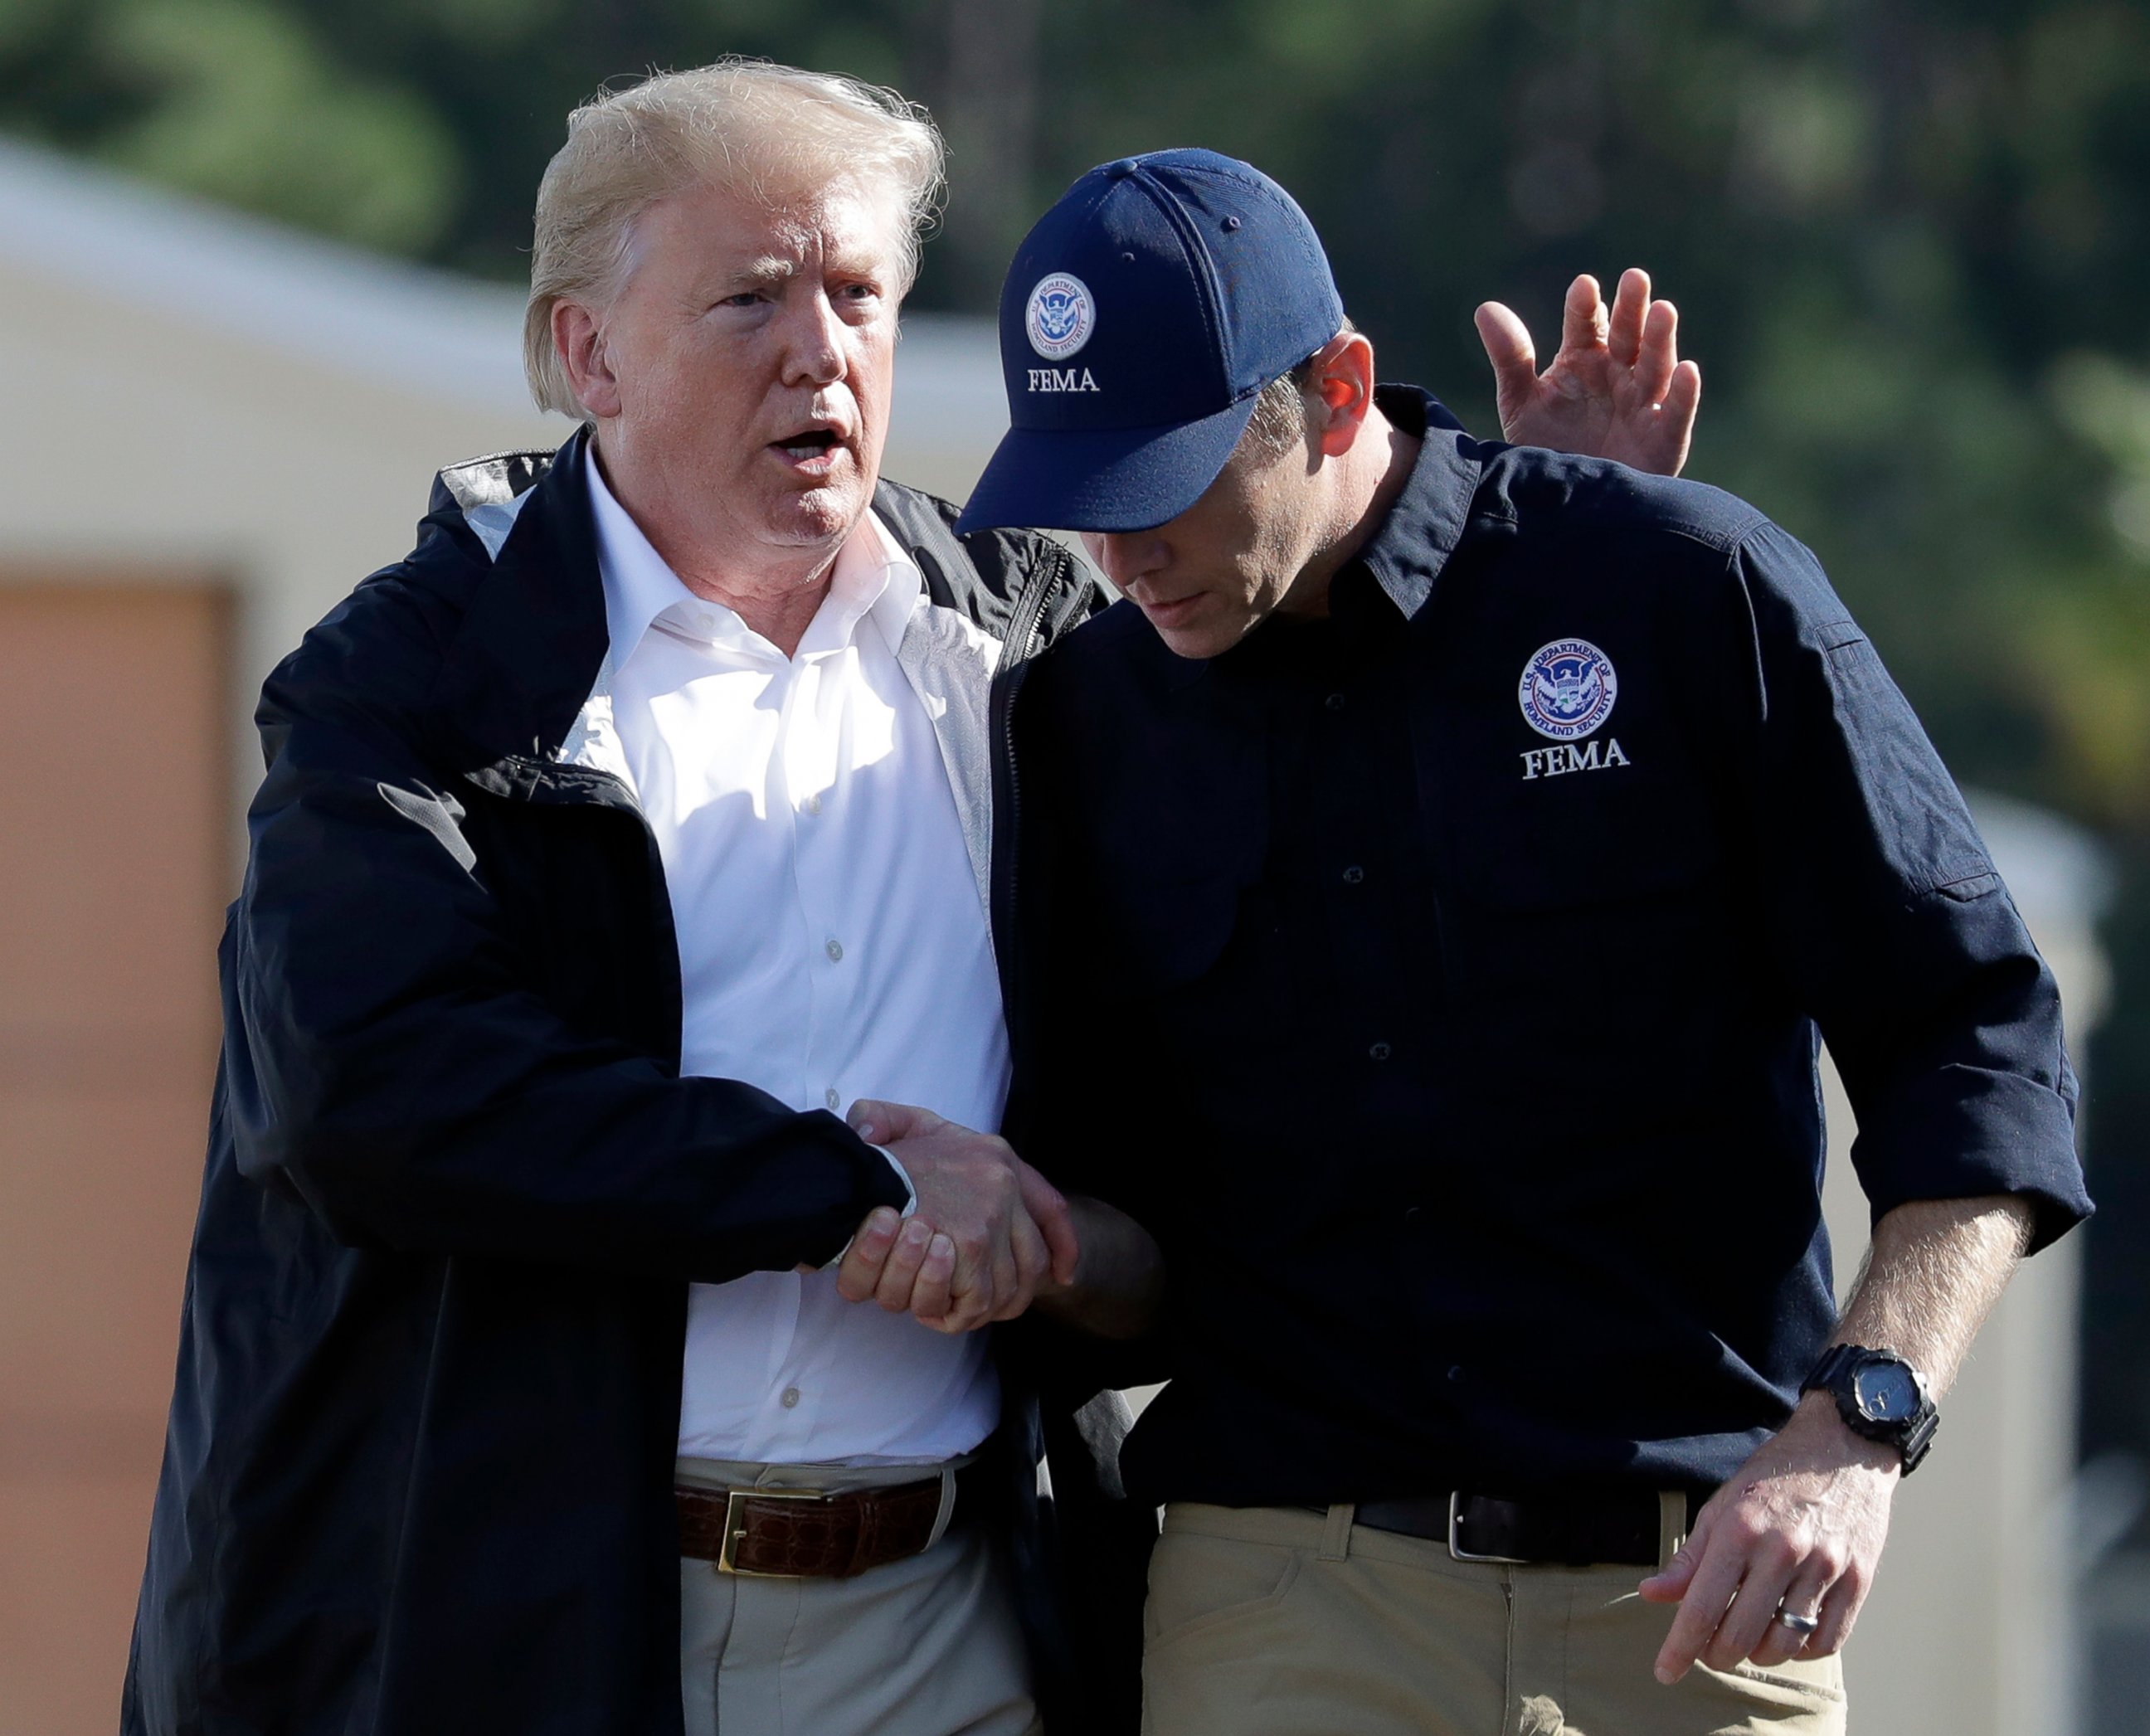 PHOTO: President Donald Trump shakes hands with FEMA Administrator Brock Long after visiting areas in North Carolina and South Carolina impacted by Hurricane Florence, Wednesday, Sept. 19, 2018, at Myrtle Beach International Airport in Myrtle Beach, S.C.